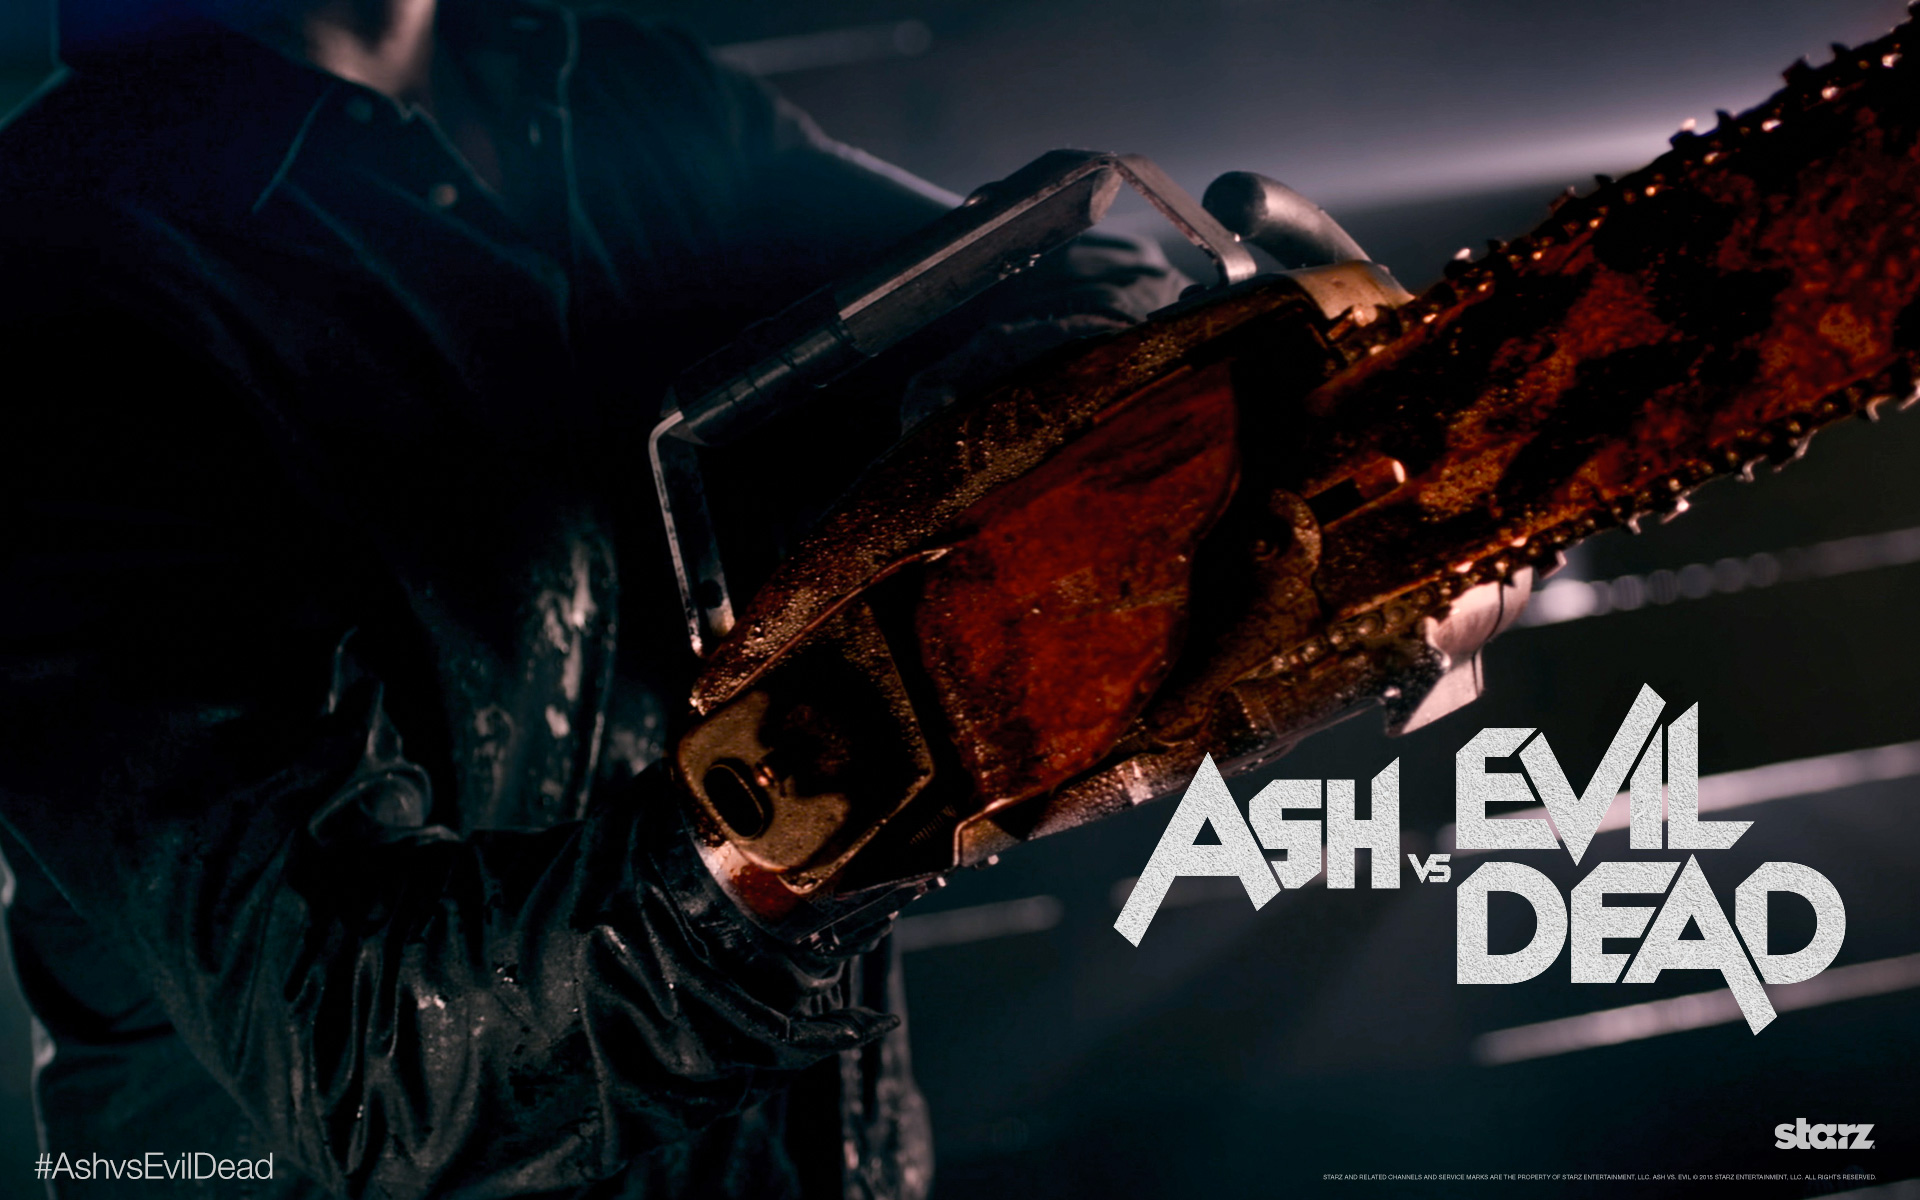 "Ash vs Evil Dead" on Home Video This Summer